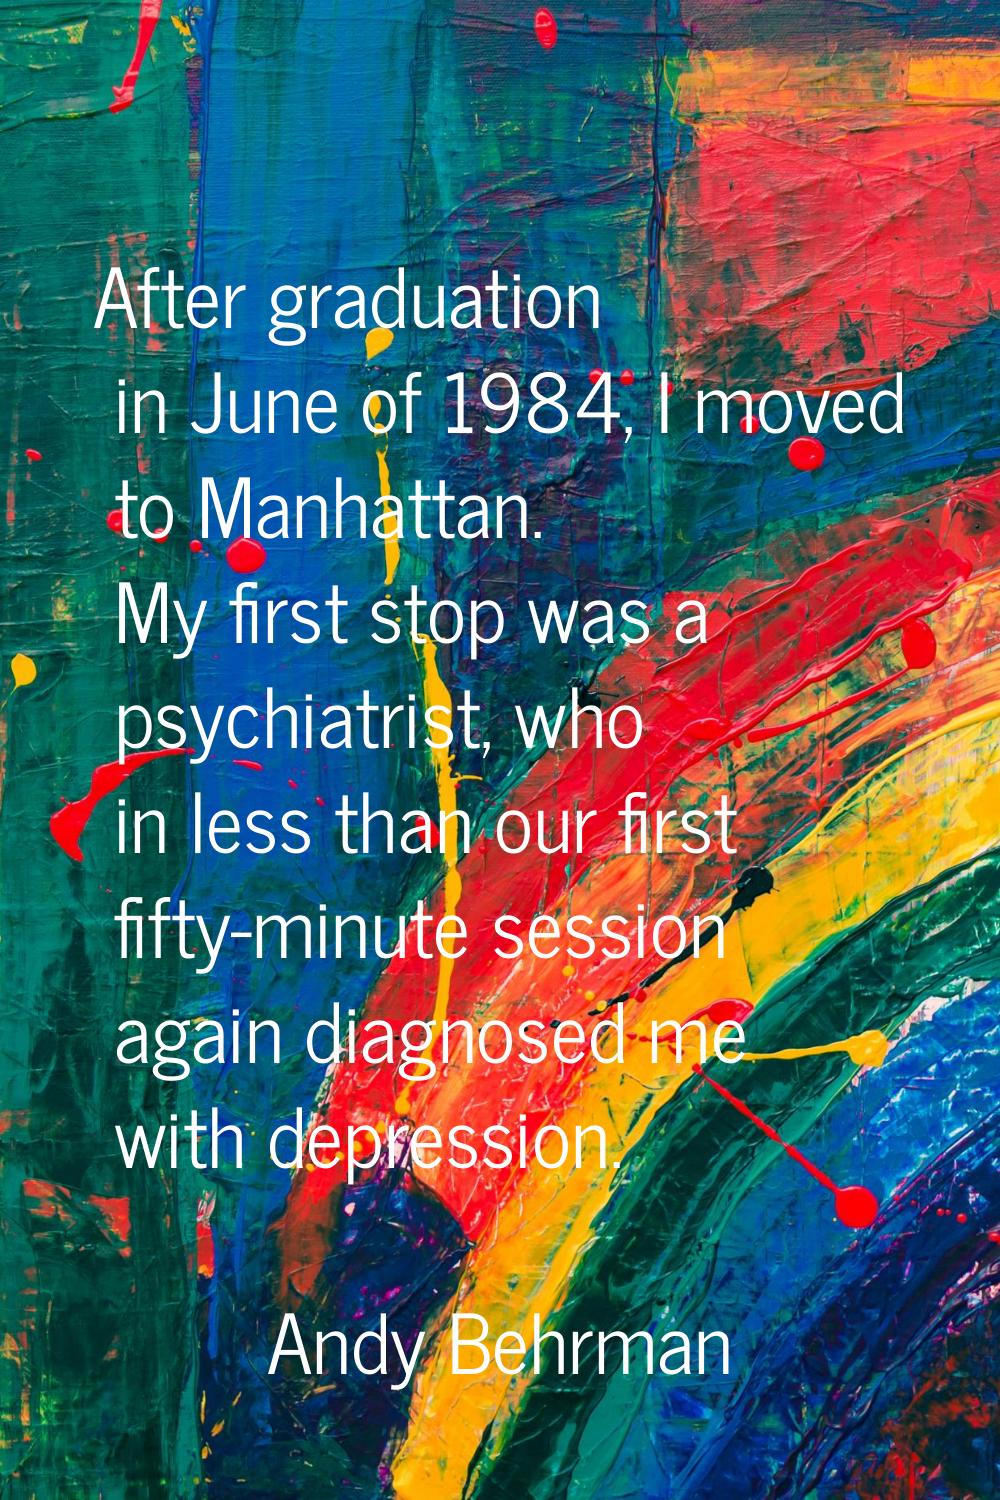 After graduation in June of 1984, I moved to Manhattan. My first stop was a psychiatrist, who in le